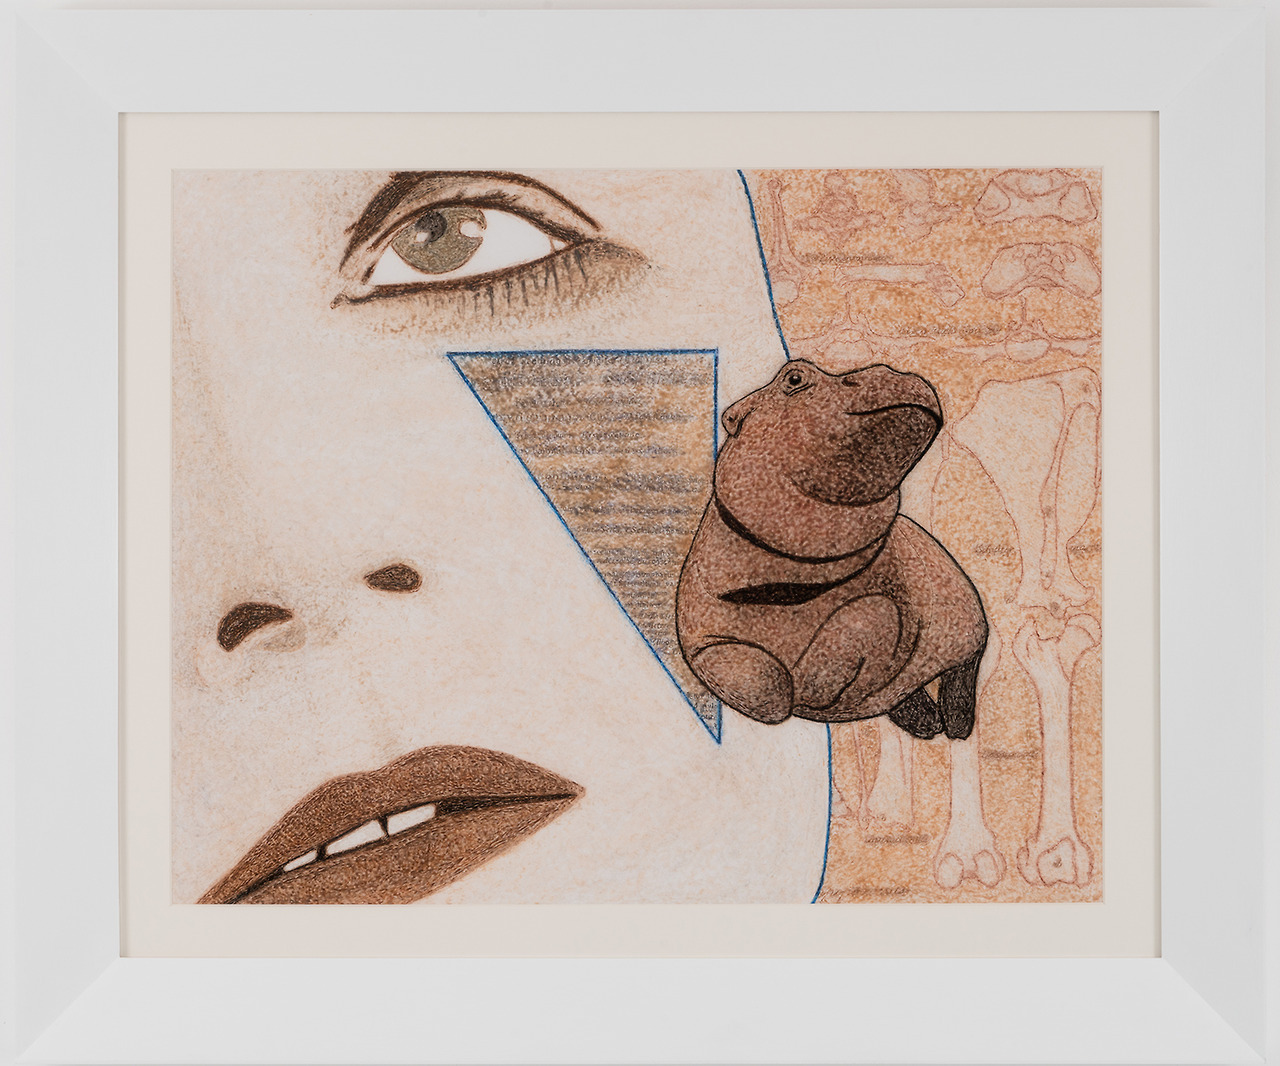 Atticus Bergman
Requiem with Pola Negri and Fiona the Hippo (part 2), 2017
Crayola® Crayon on paper
19 × 24 inches (48.26 × 60.96 cm)